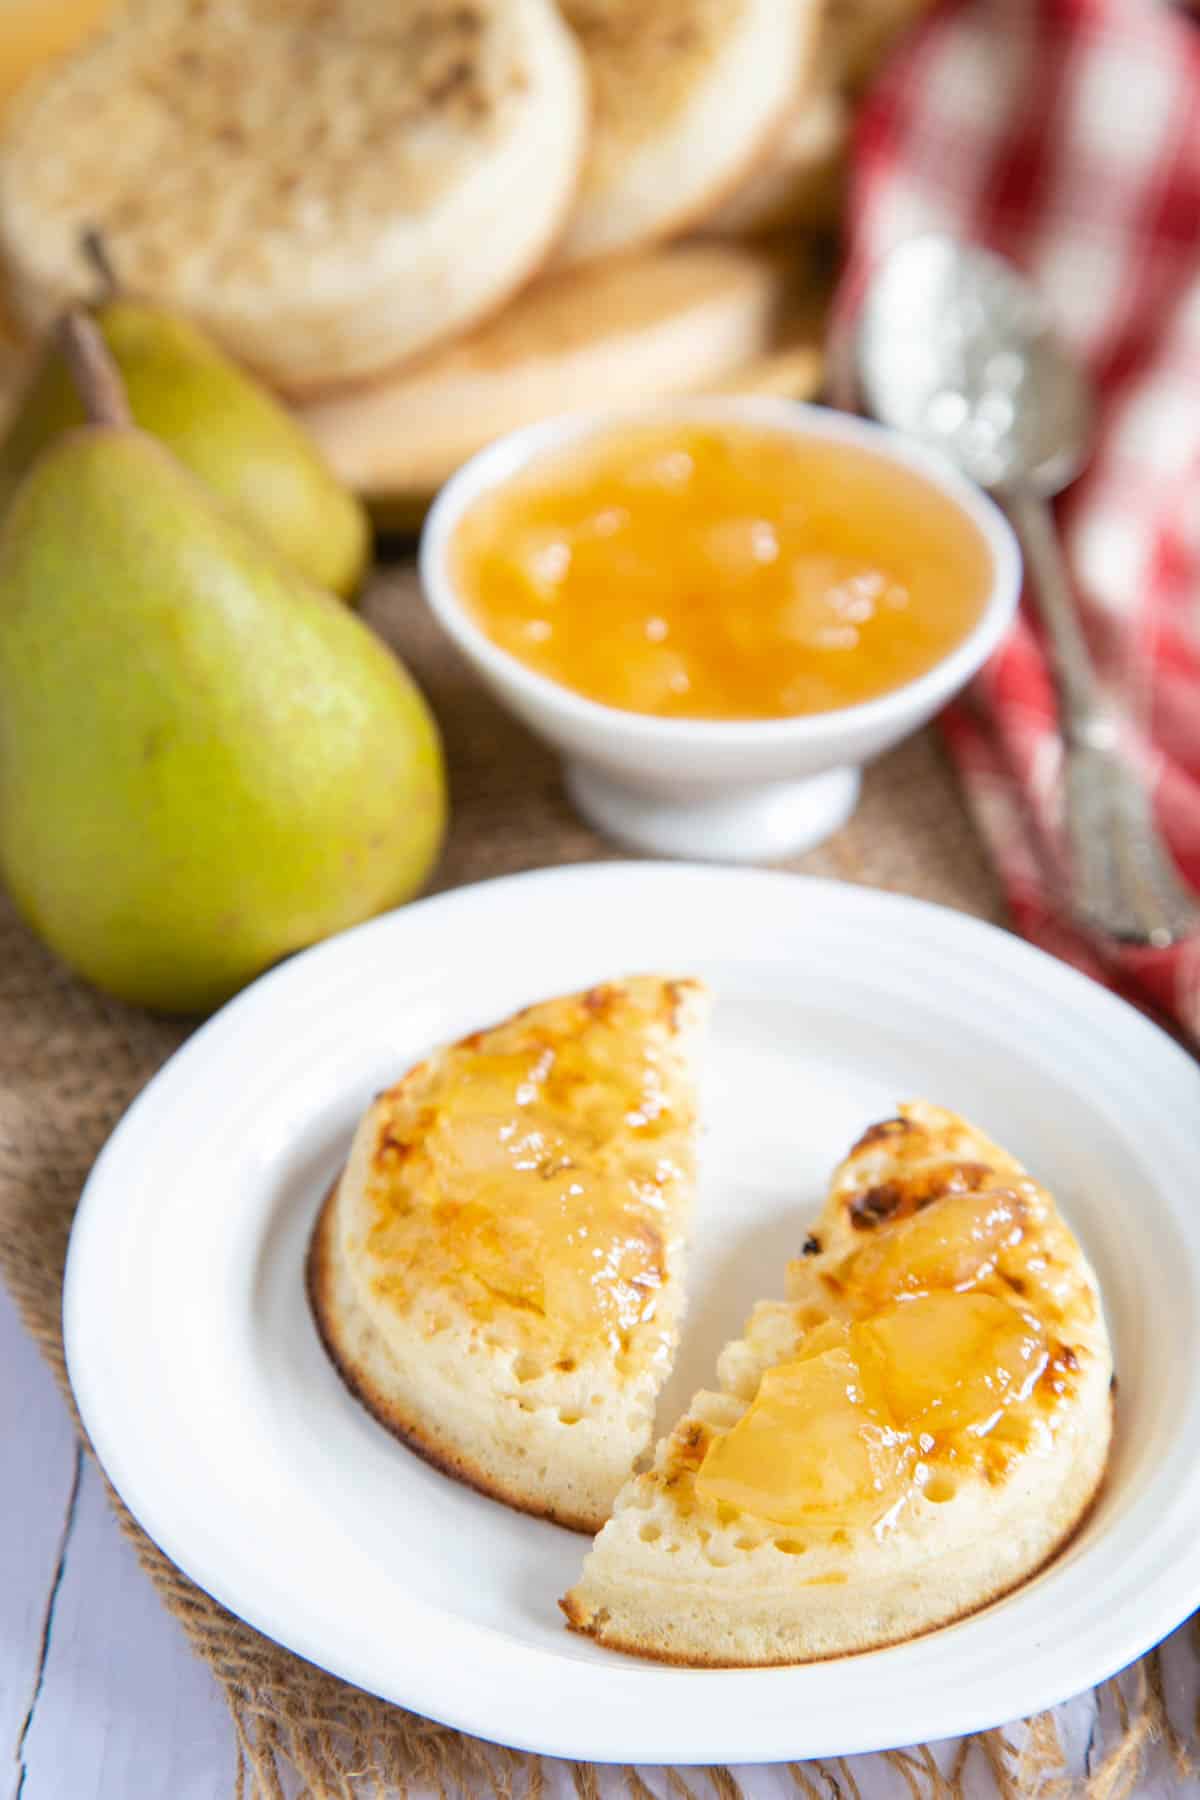 A toasted crumpet spread with butter and golden pear jam. More jam in a small dish and more crumpets in the background.